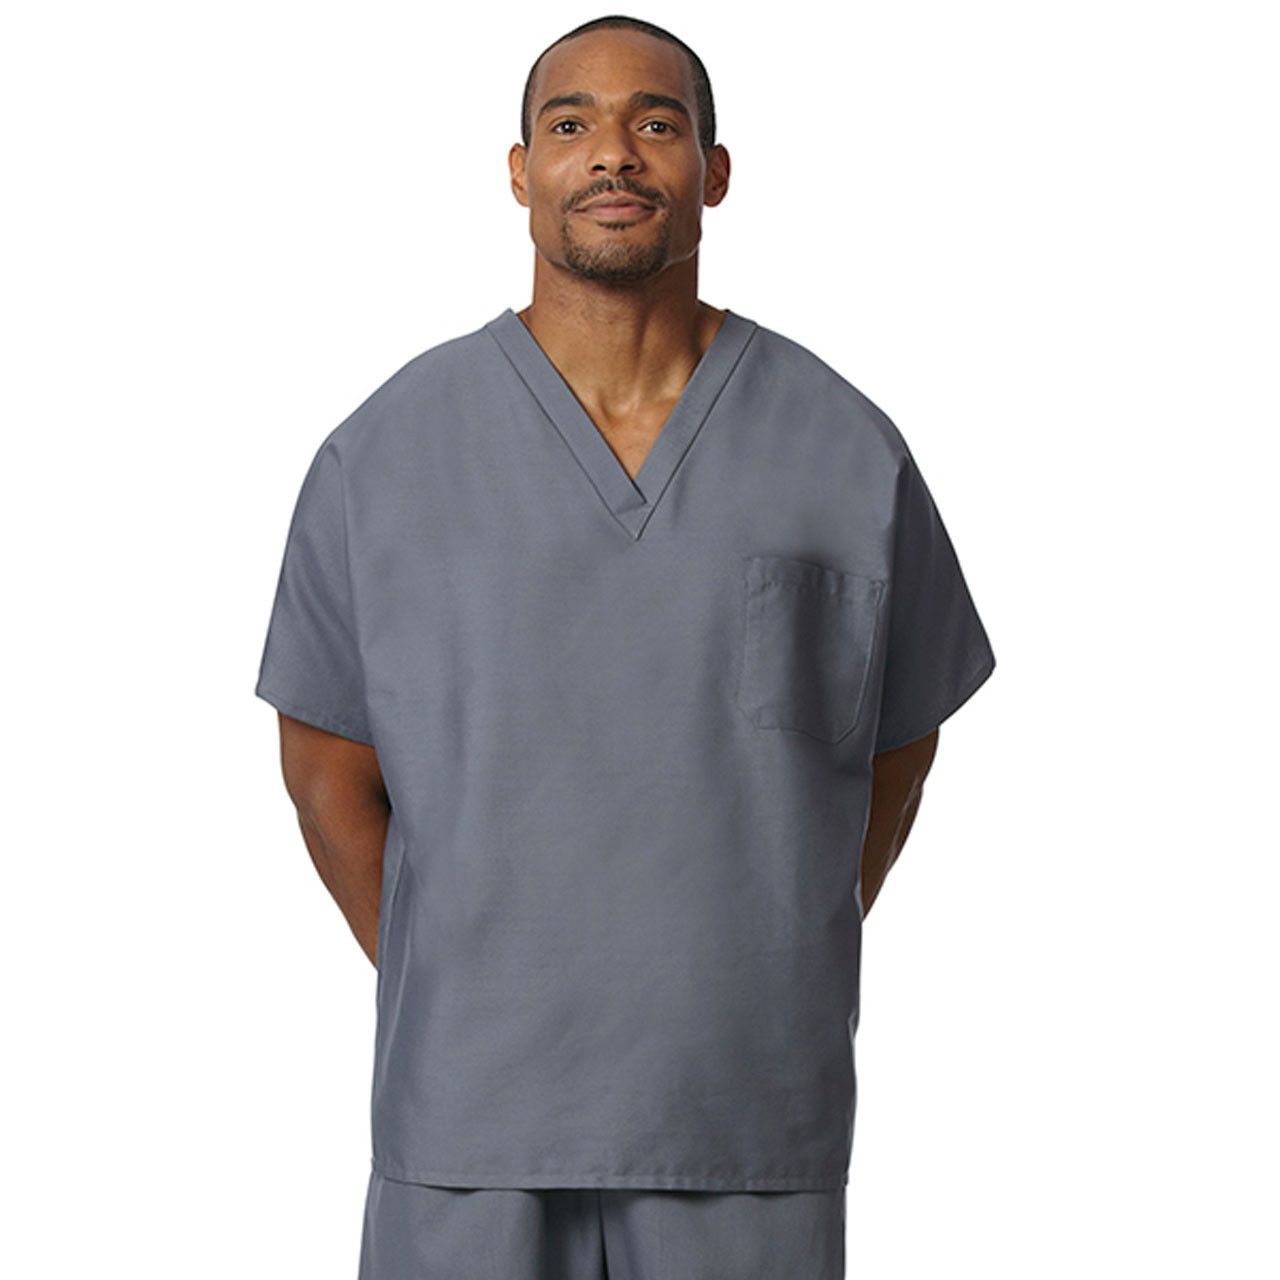 Can the Womens and Mens Tall Scrub Tops be worn in different roles within a healthcare setting?